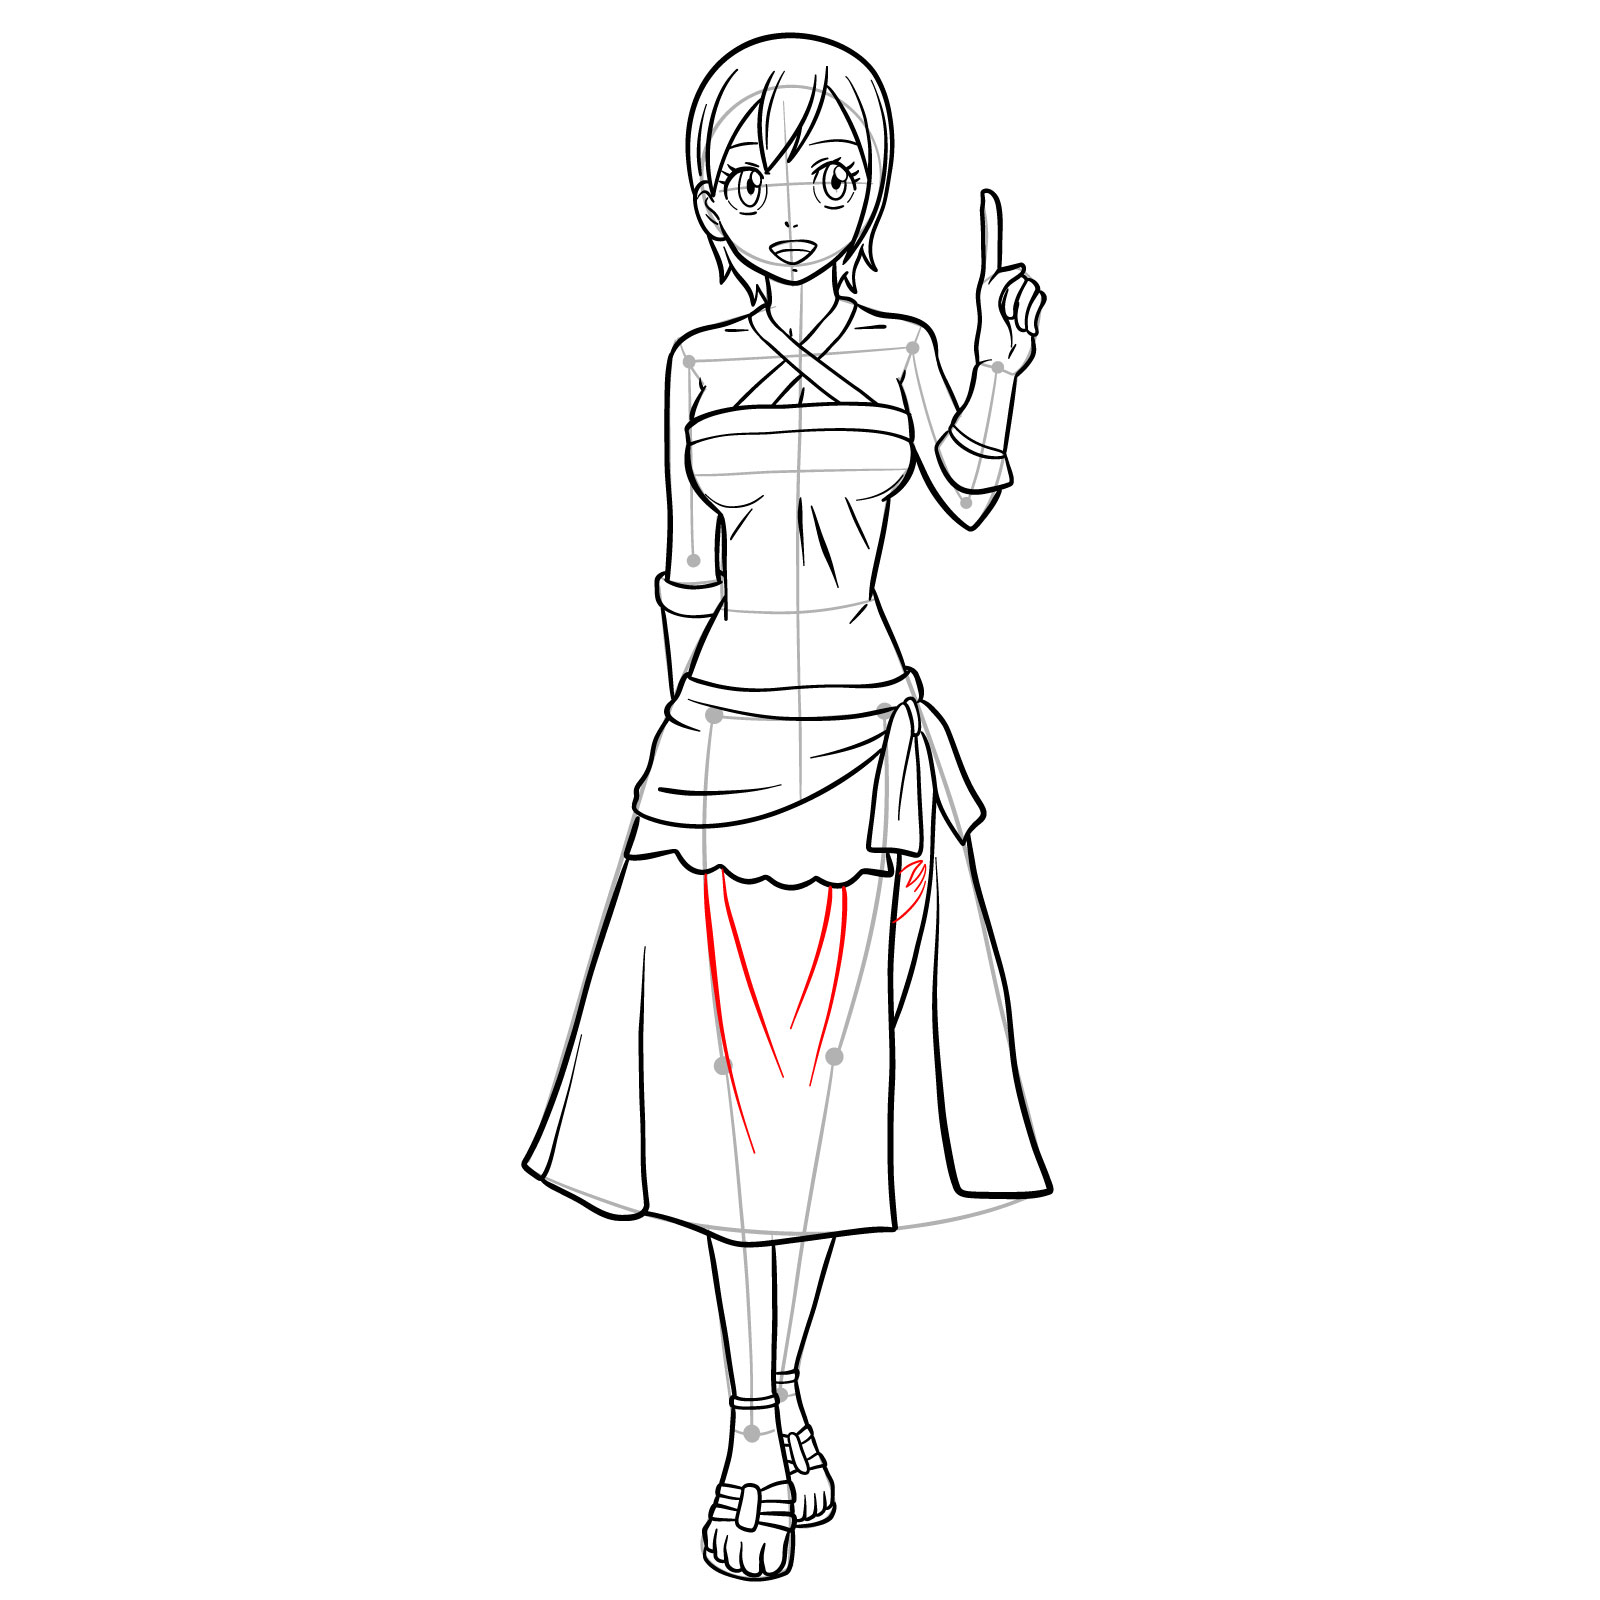 How to draw Lisanna Strauss from Fairy Tail - step 36